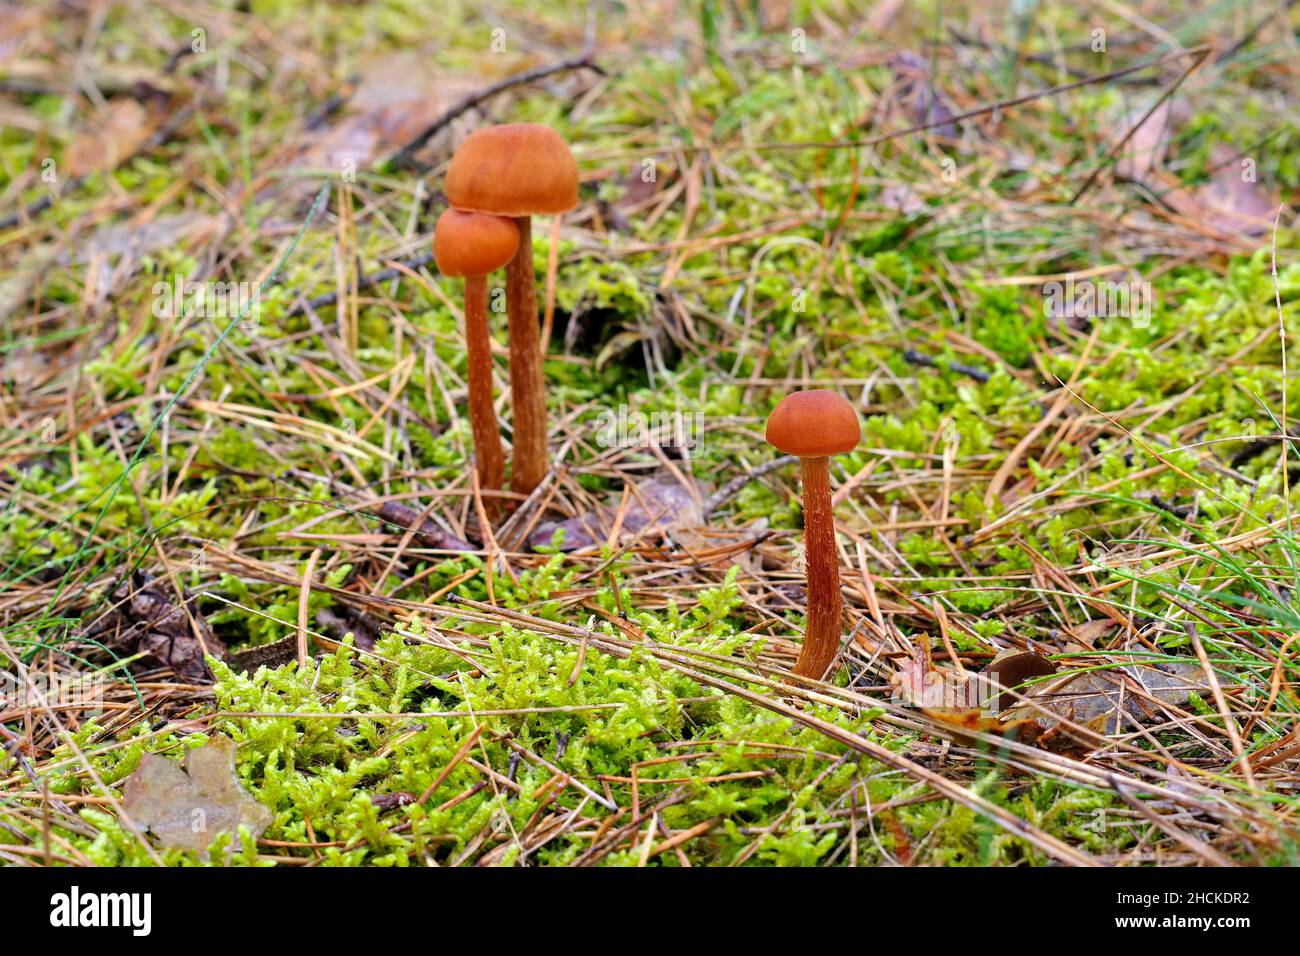 a group of Laccaria mushrooms in autumn forest Stock Photo